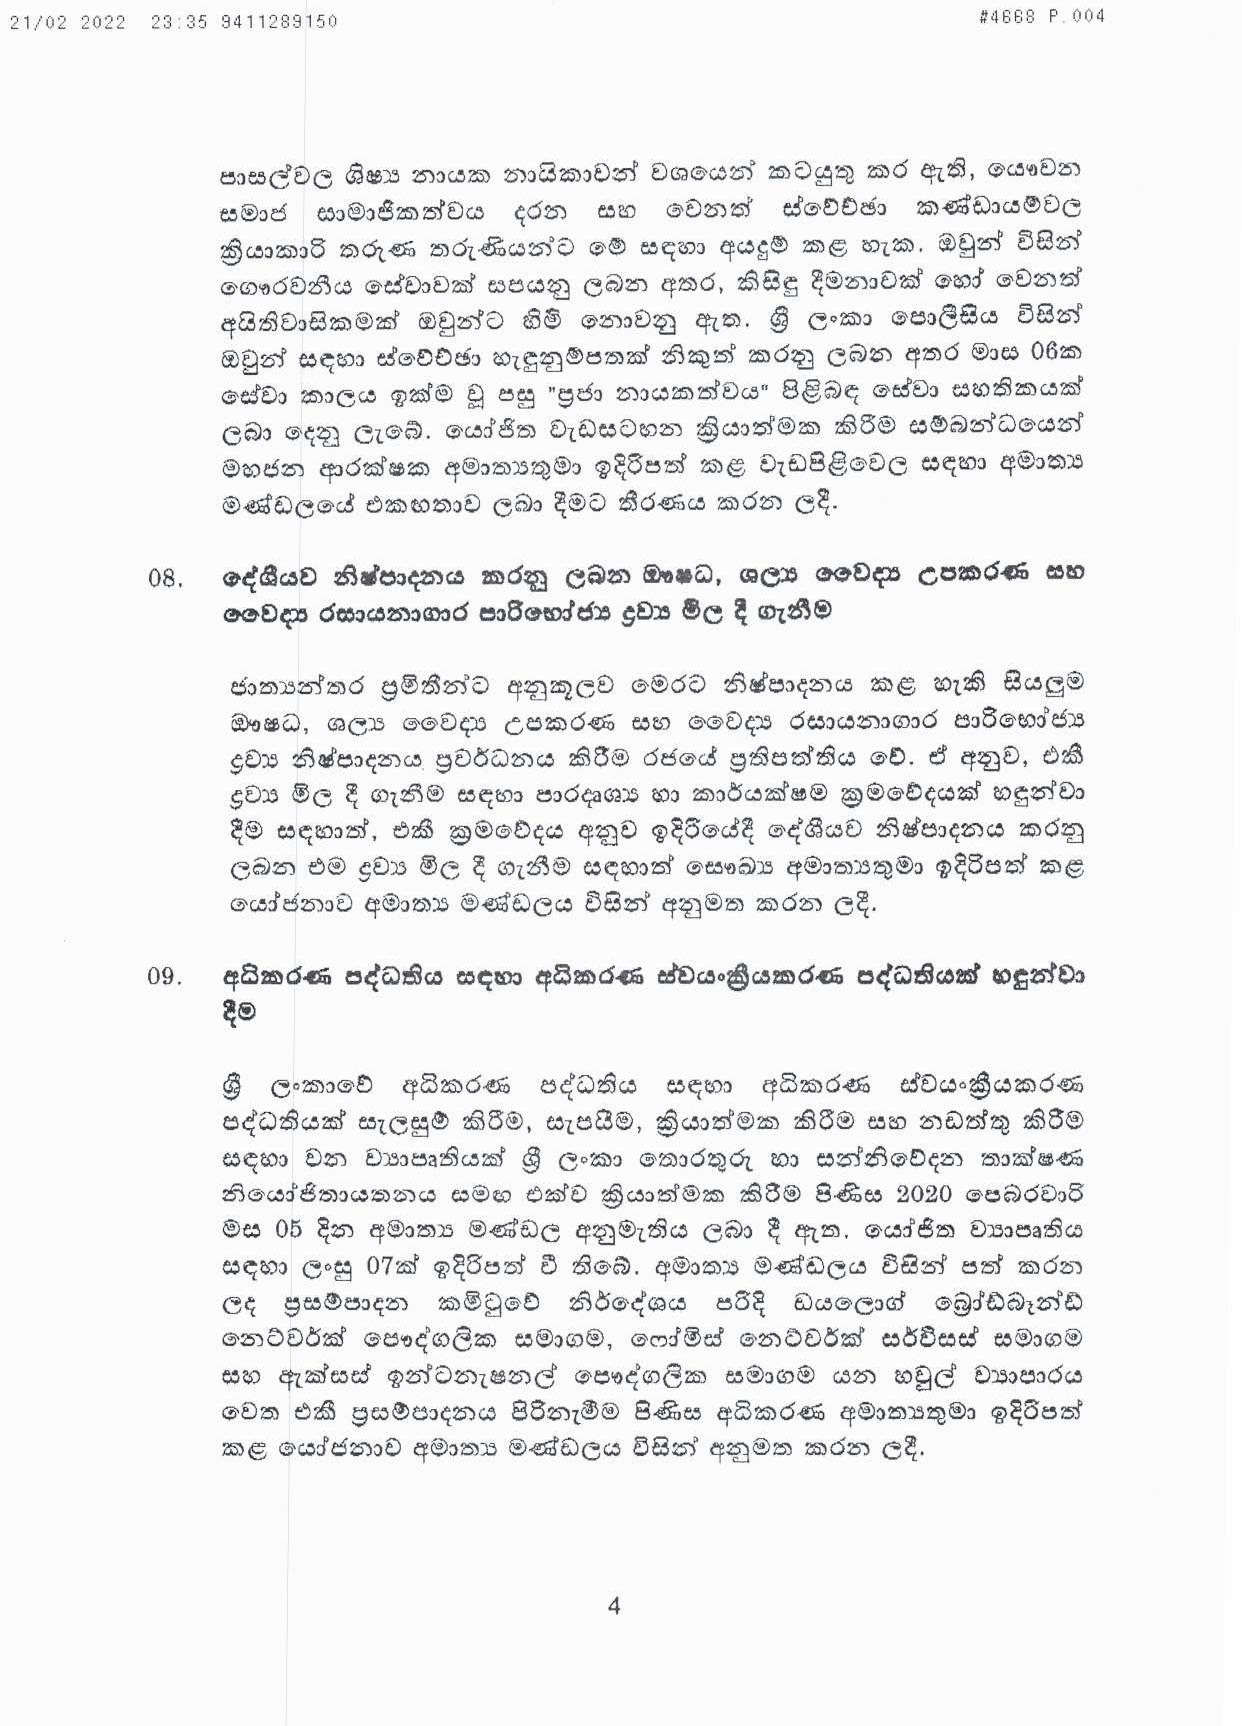 Cabinet Decision on 21.02.2022 page 004